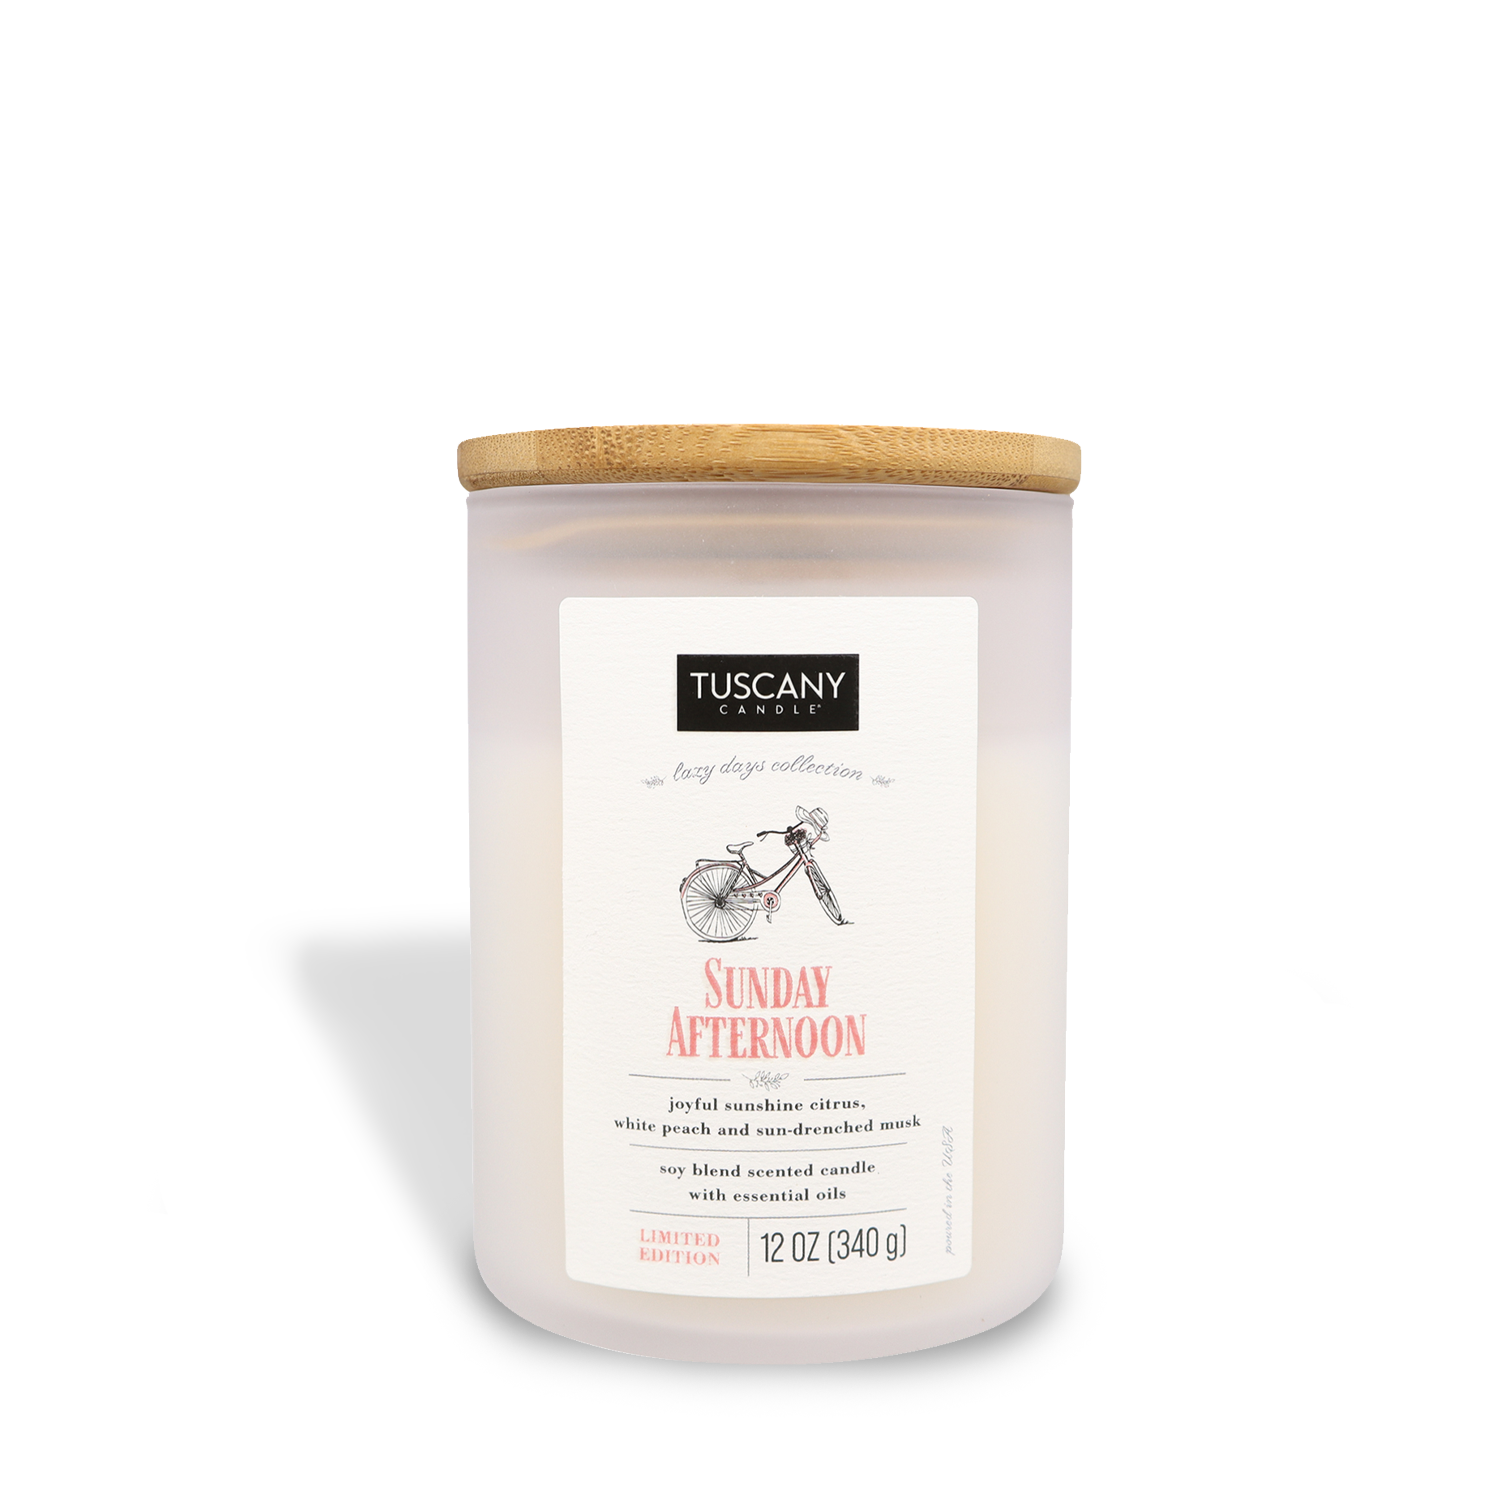 A scented candle from Tuscany Candle® SEASONAL with Sunday Afternoon fragrance in a 12 oz jar, labeled as a limited edition.